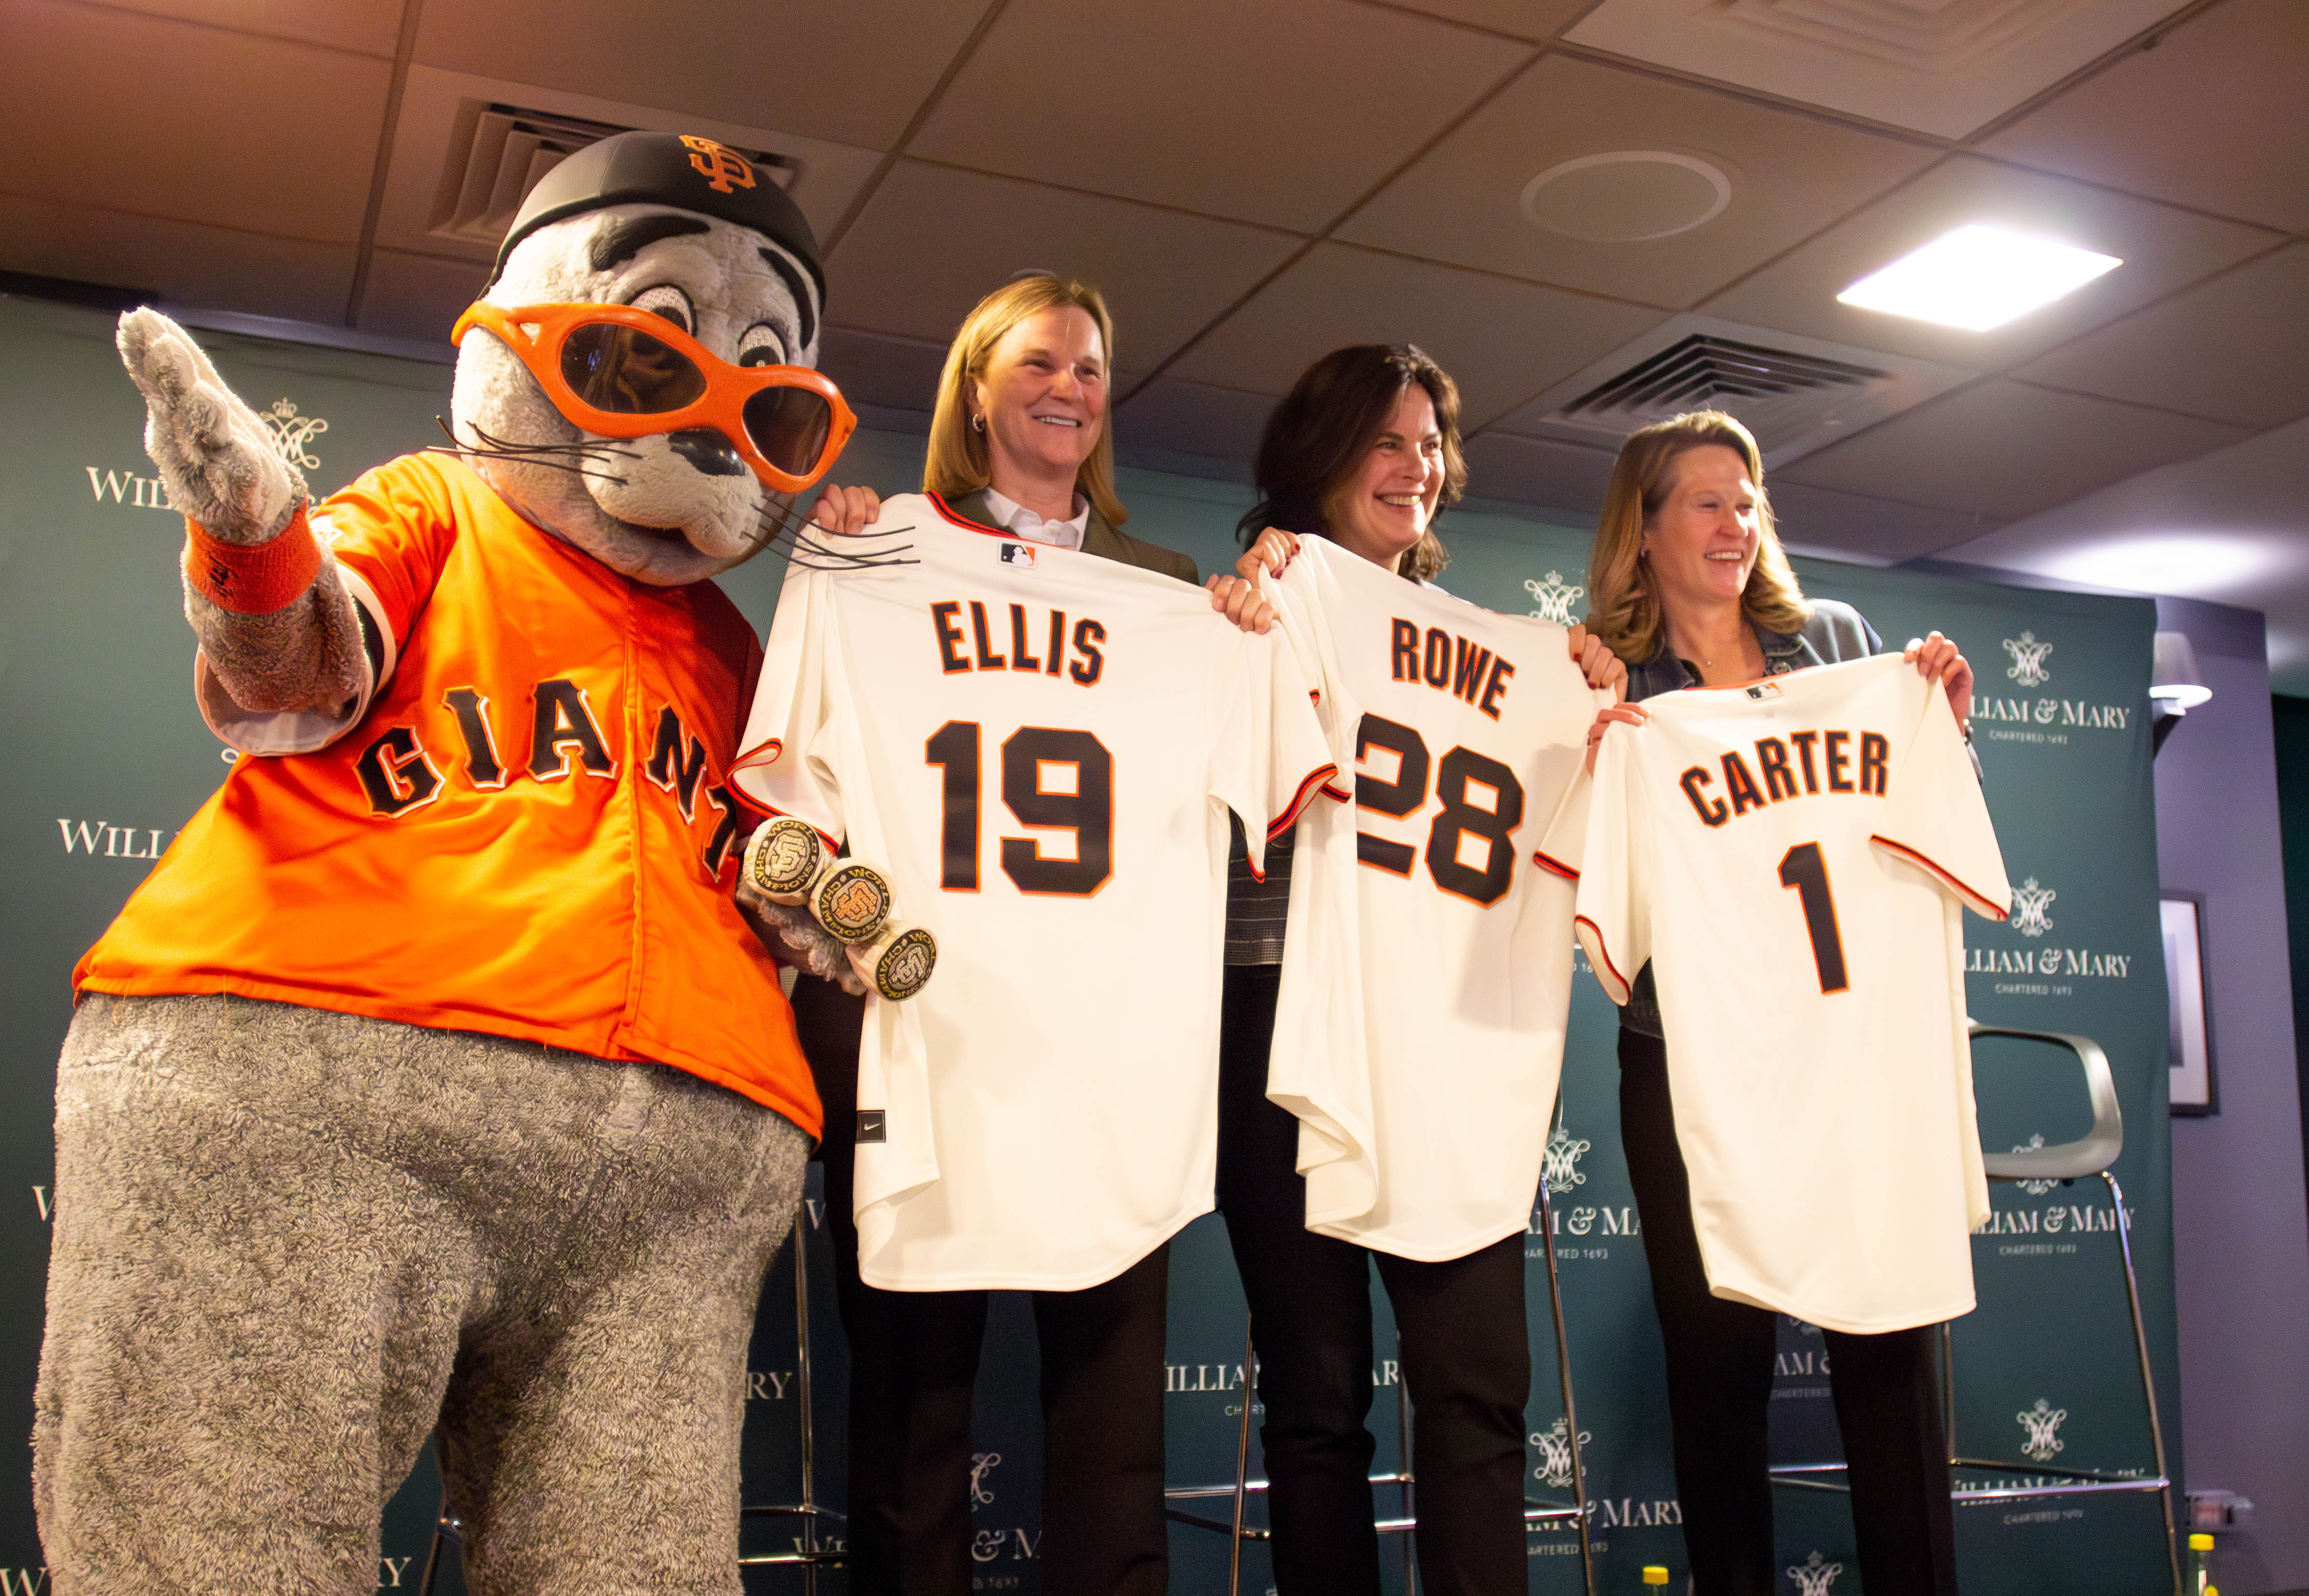 President Rowe, Jill Ellis and Kathy Carter received Giants jerseys from their mascot.